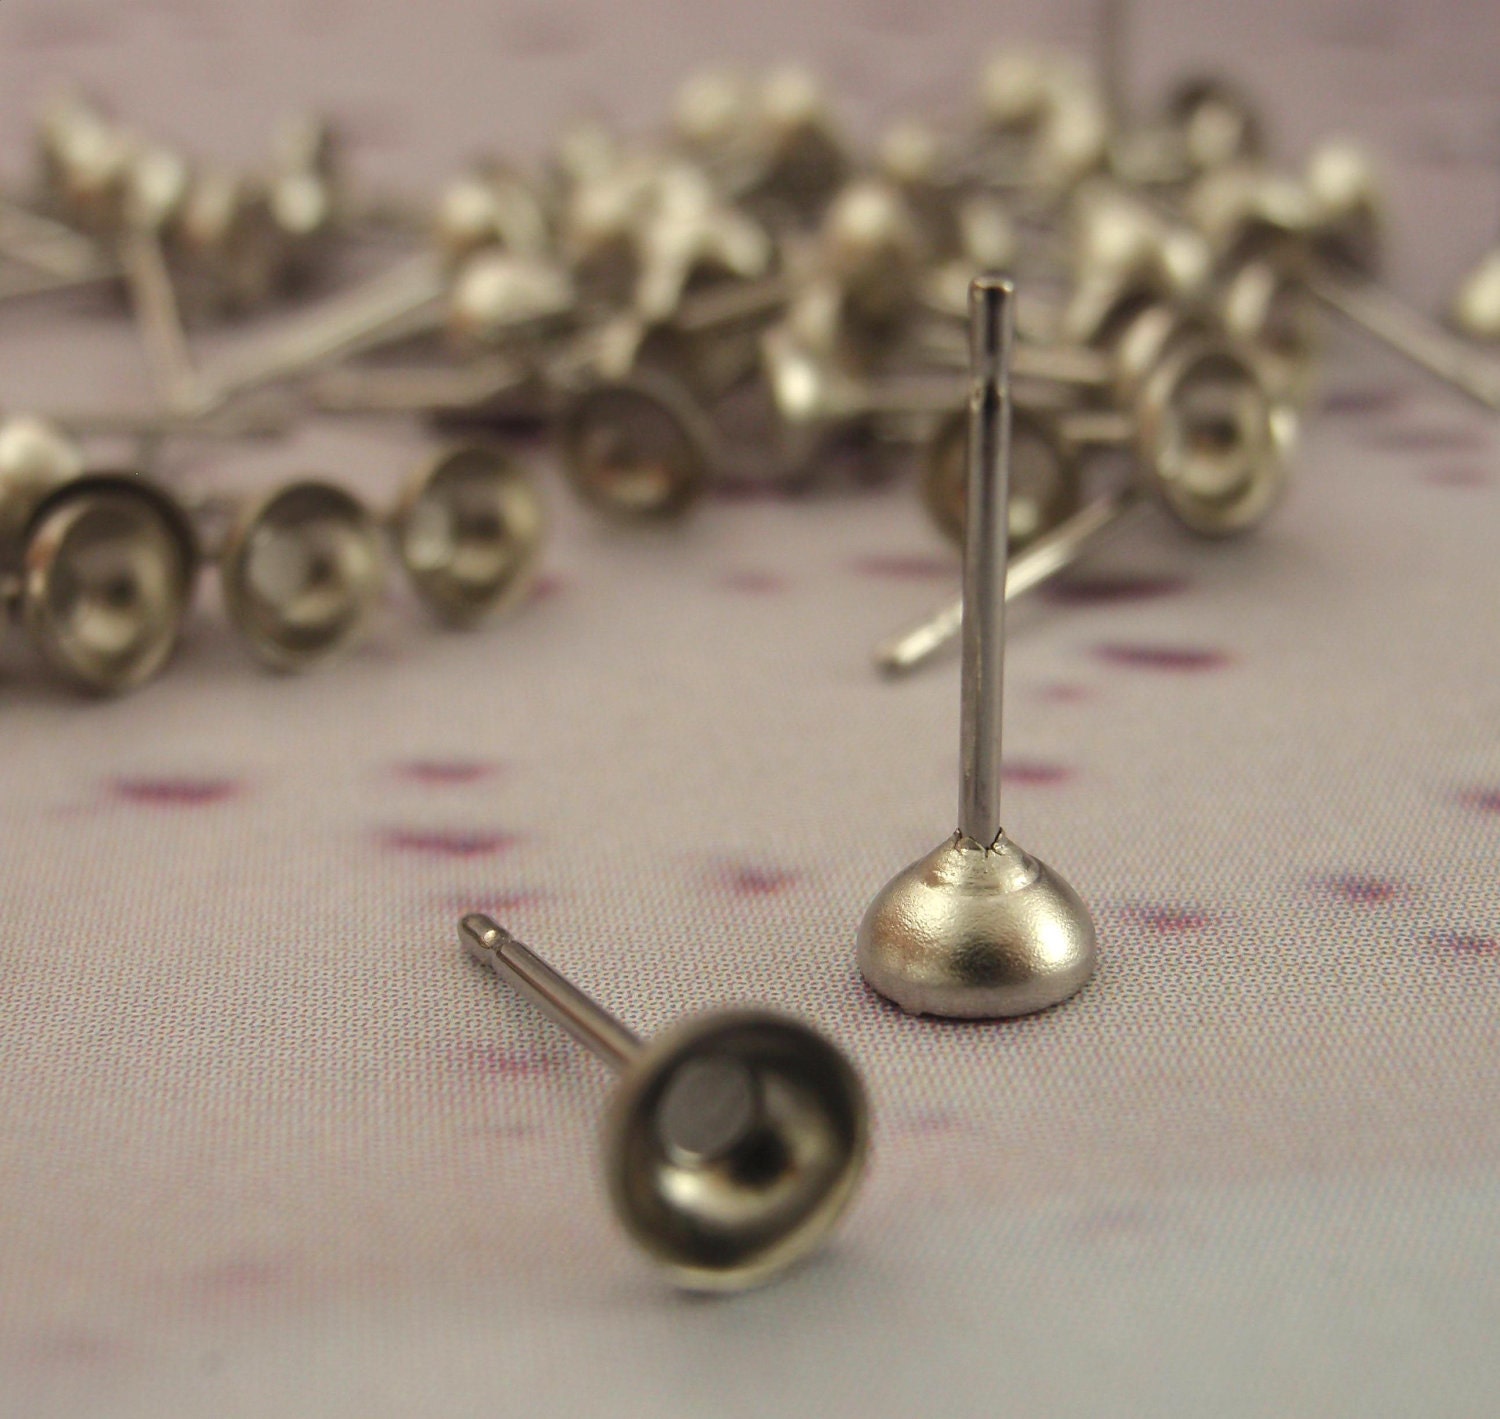 10 Pairs Stainless Steel Earring Posts with 3mm 4mm or 6mm Cup